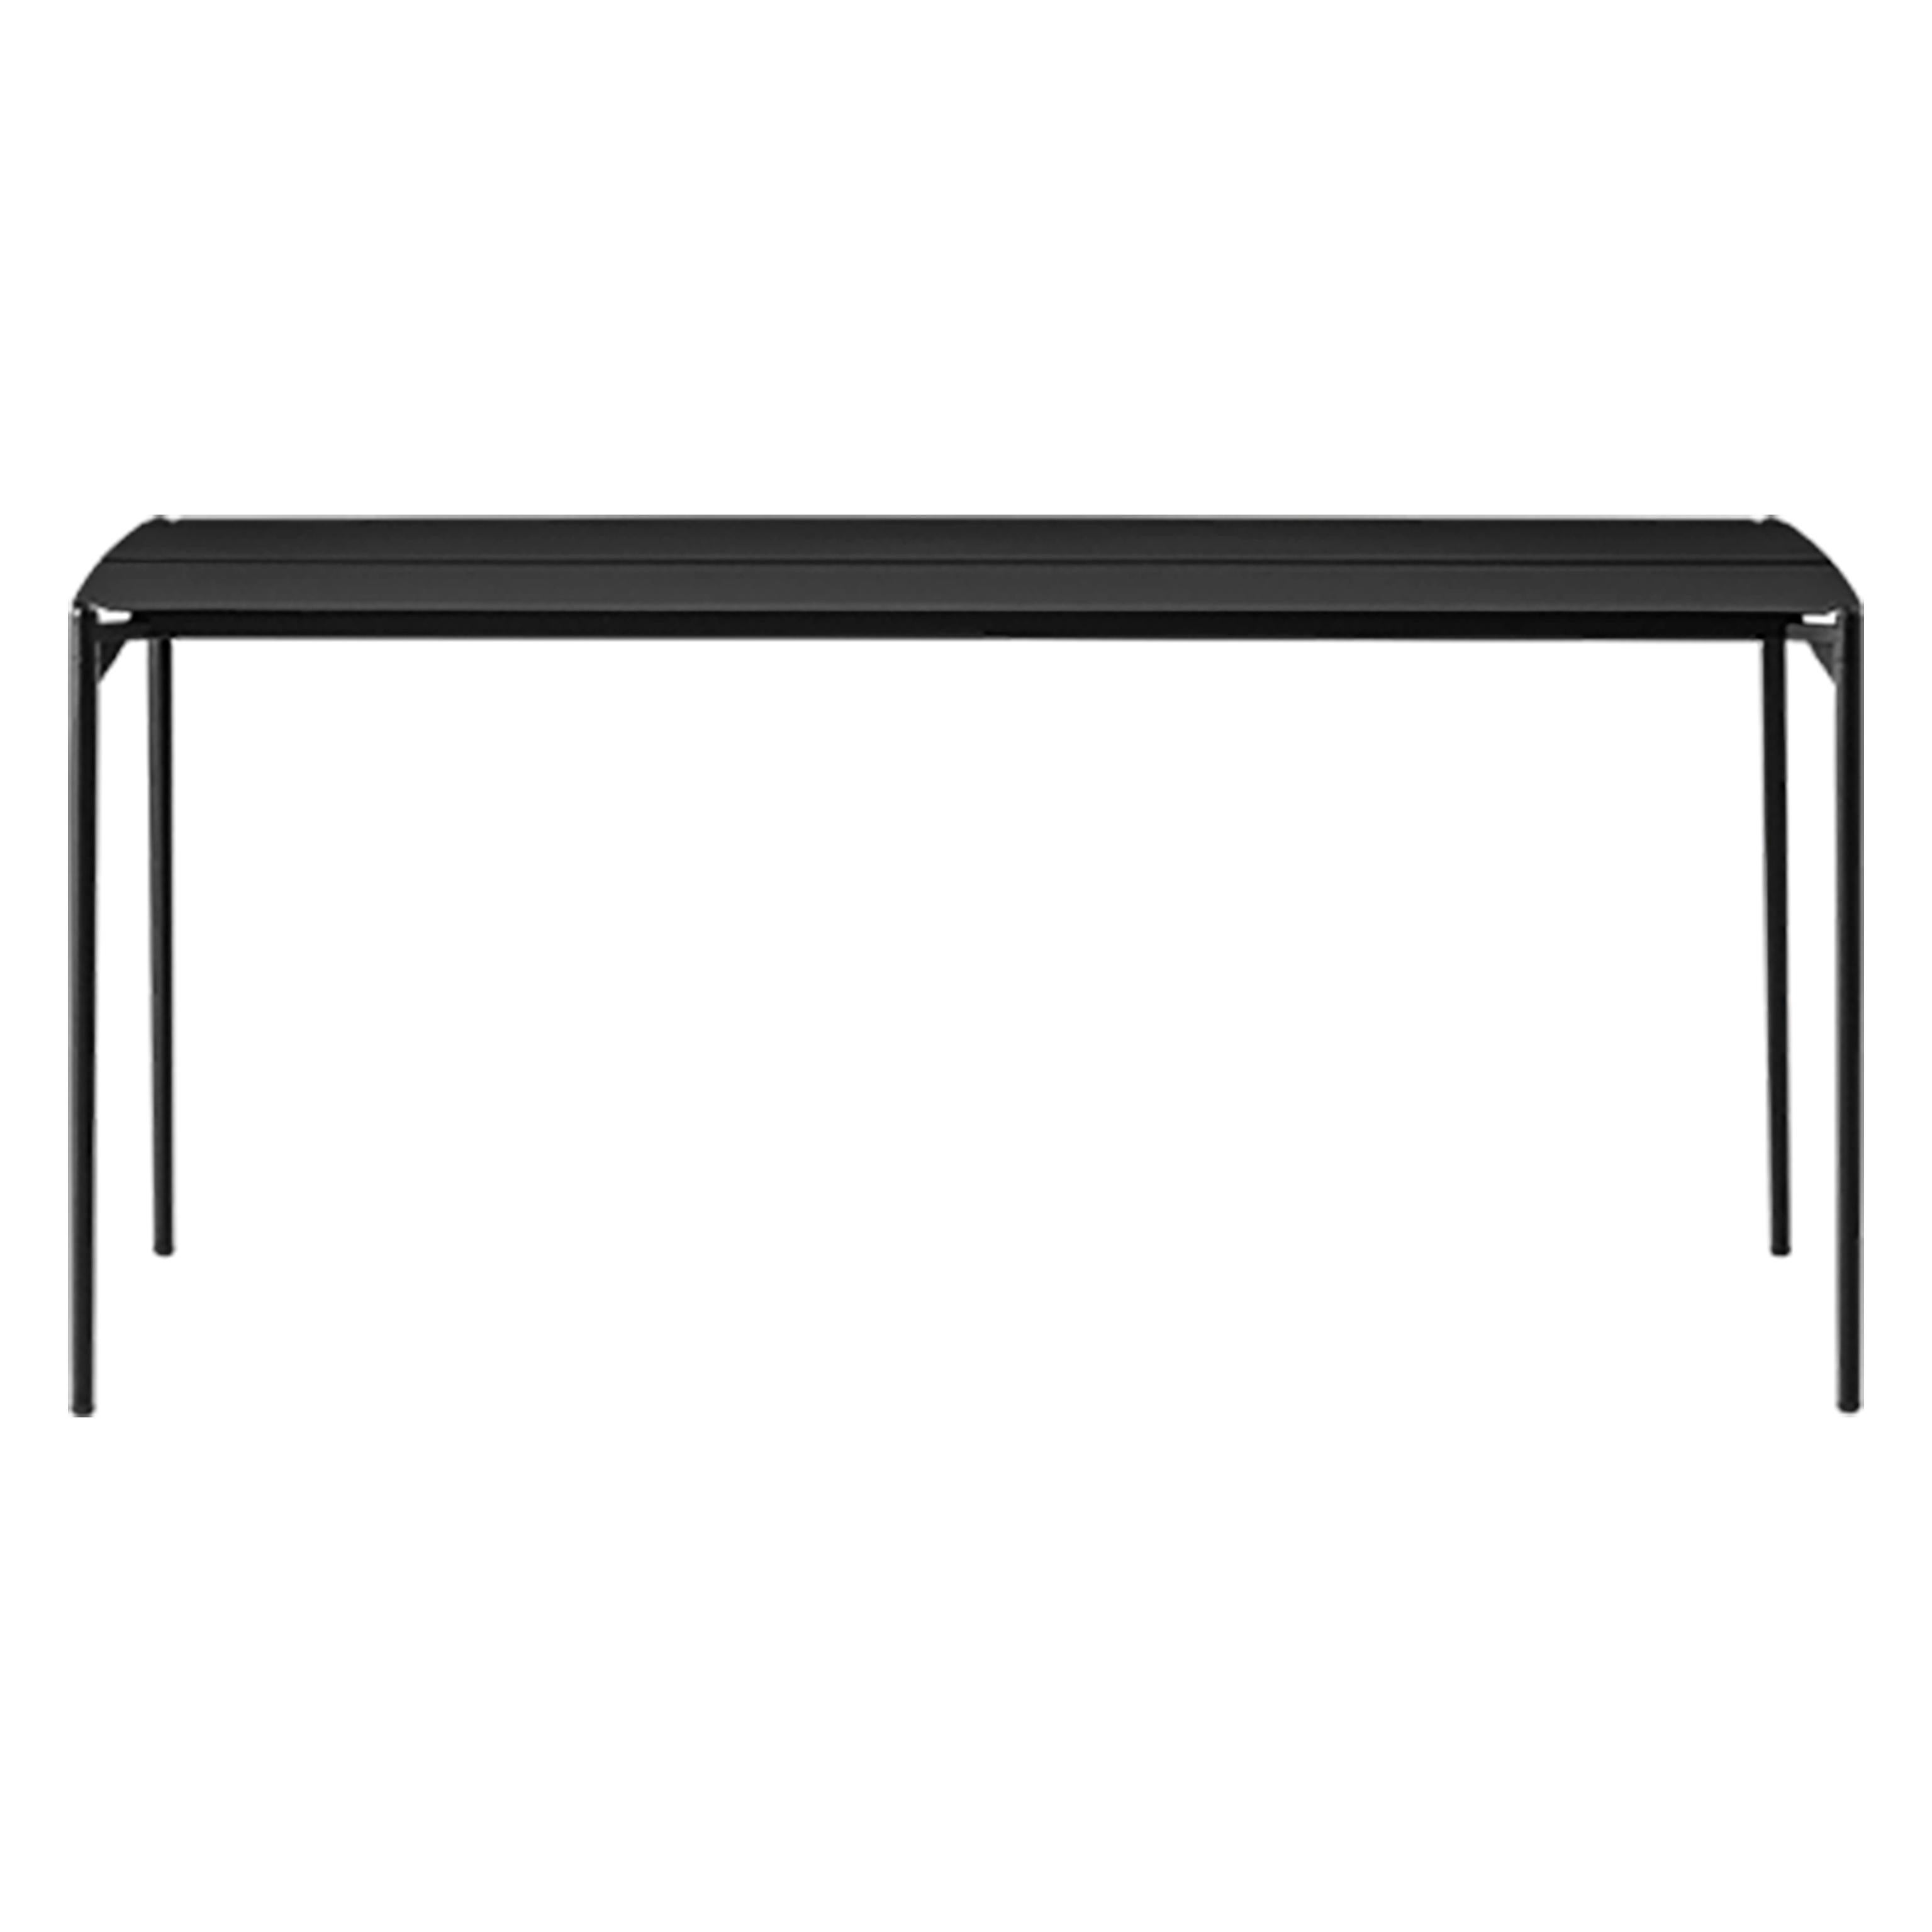 Medium black minimalist table
Dimensions: D 160 x W 80 x H 72 cm 
Materials: Steel w. Matte powder coating & aluminum w. matte powder coating.
Available in colors: Taupe, bordeaux, forest, ginger bread, black and, black and gold.


Bring